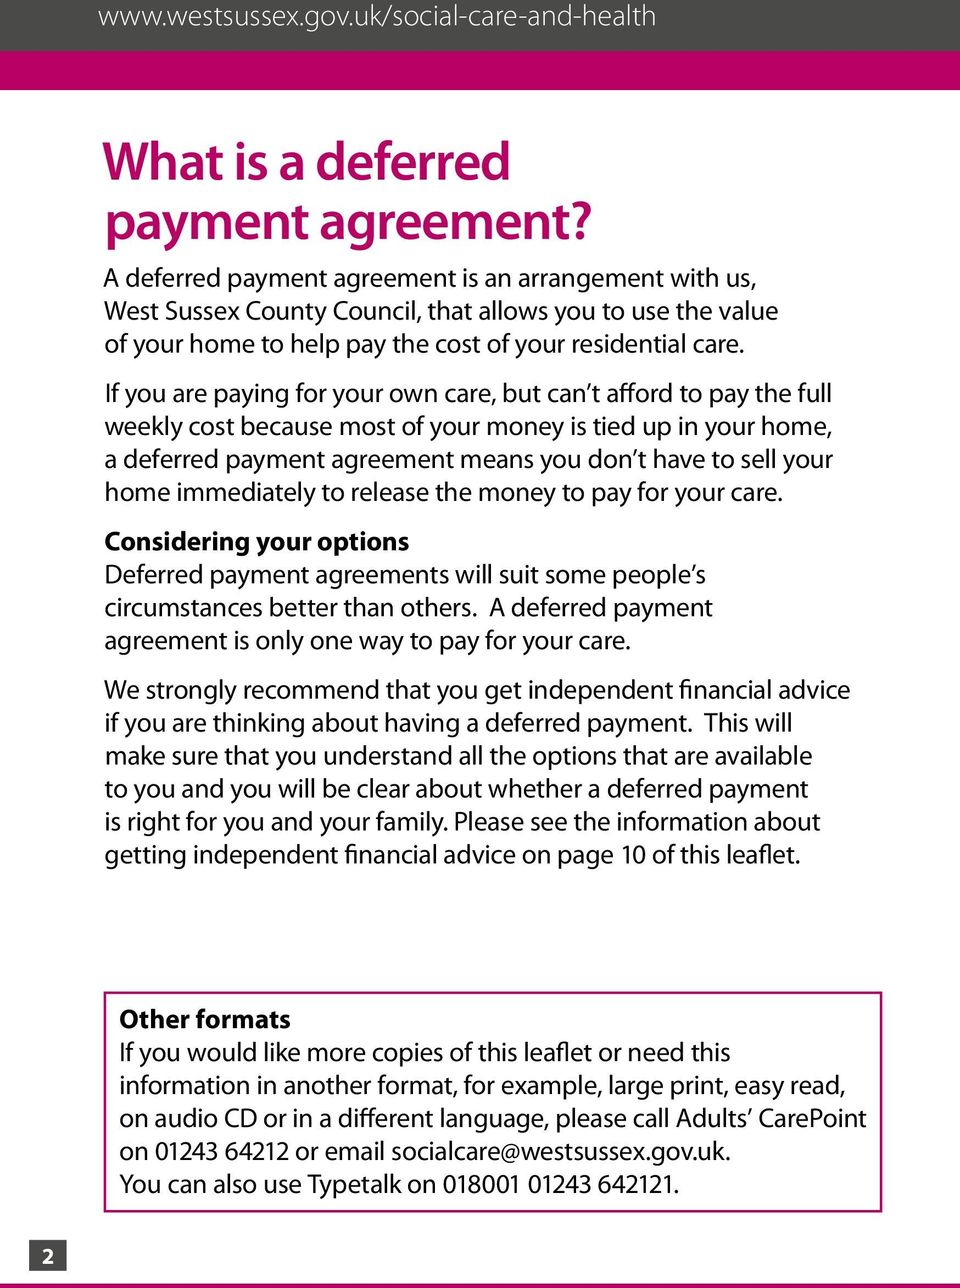 If you are paying for your own care, but can t afford to pay the full weekly cost because most of your money is tied up in your home, a deferred payment agreement means you don t have to sell your